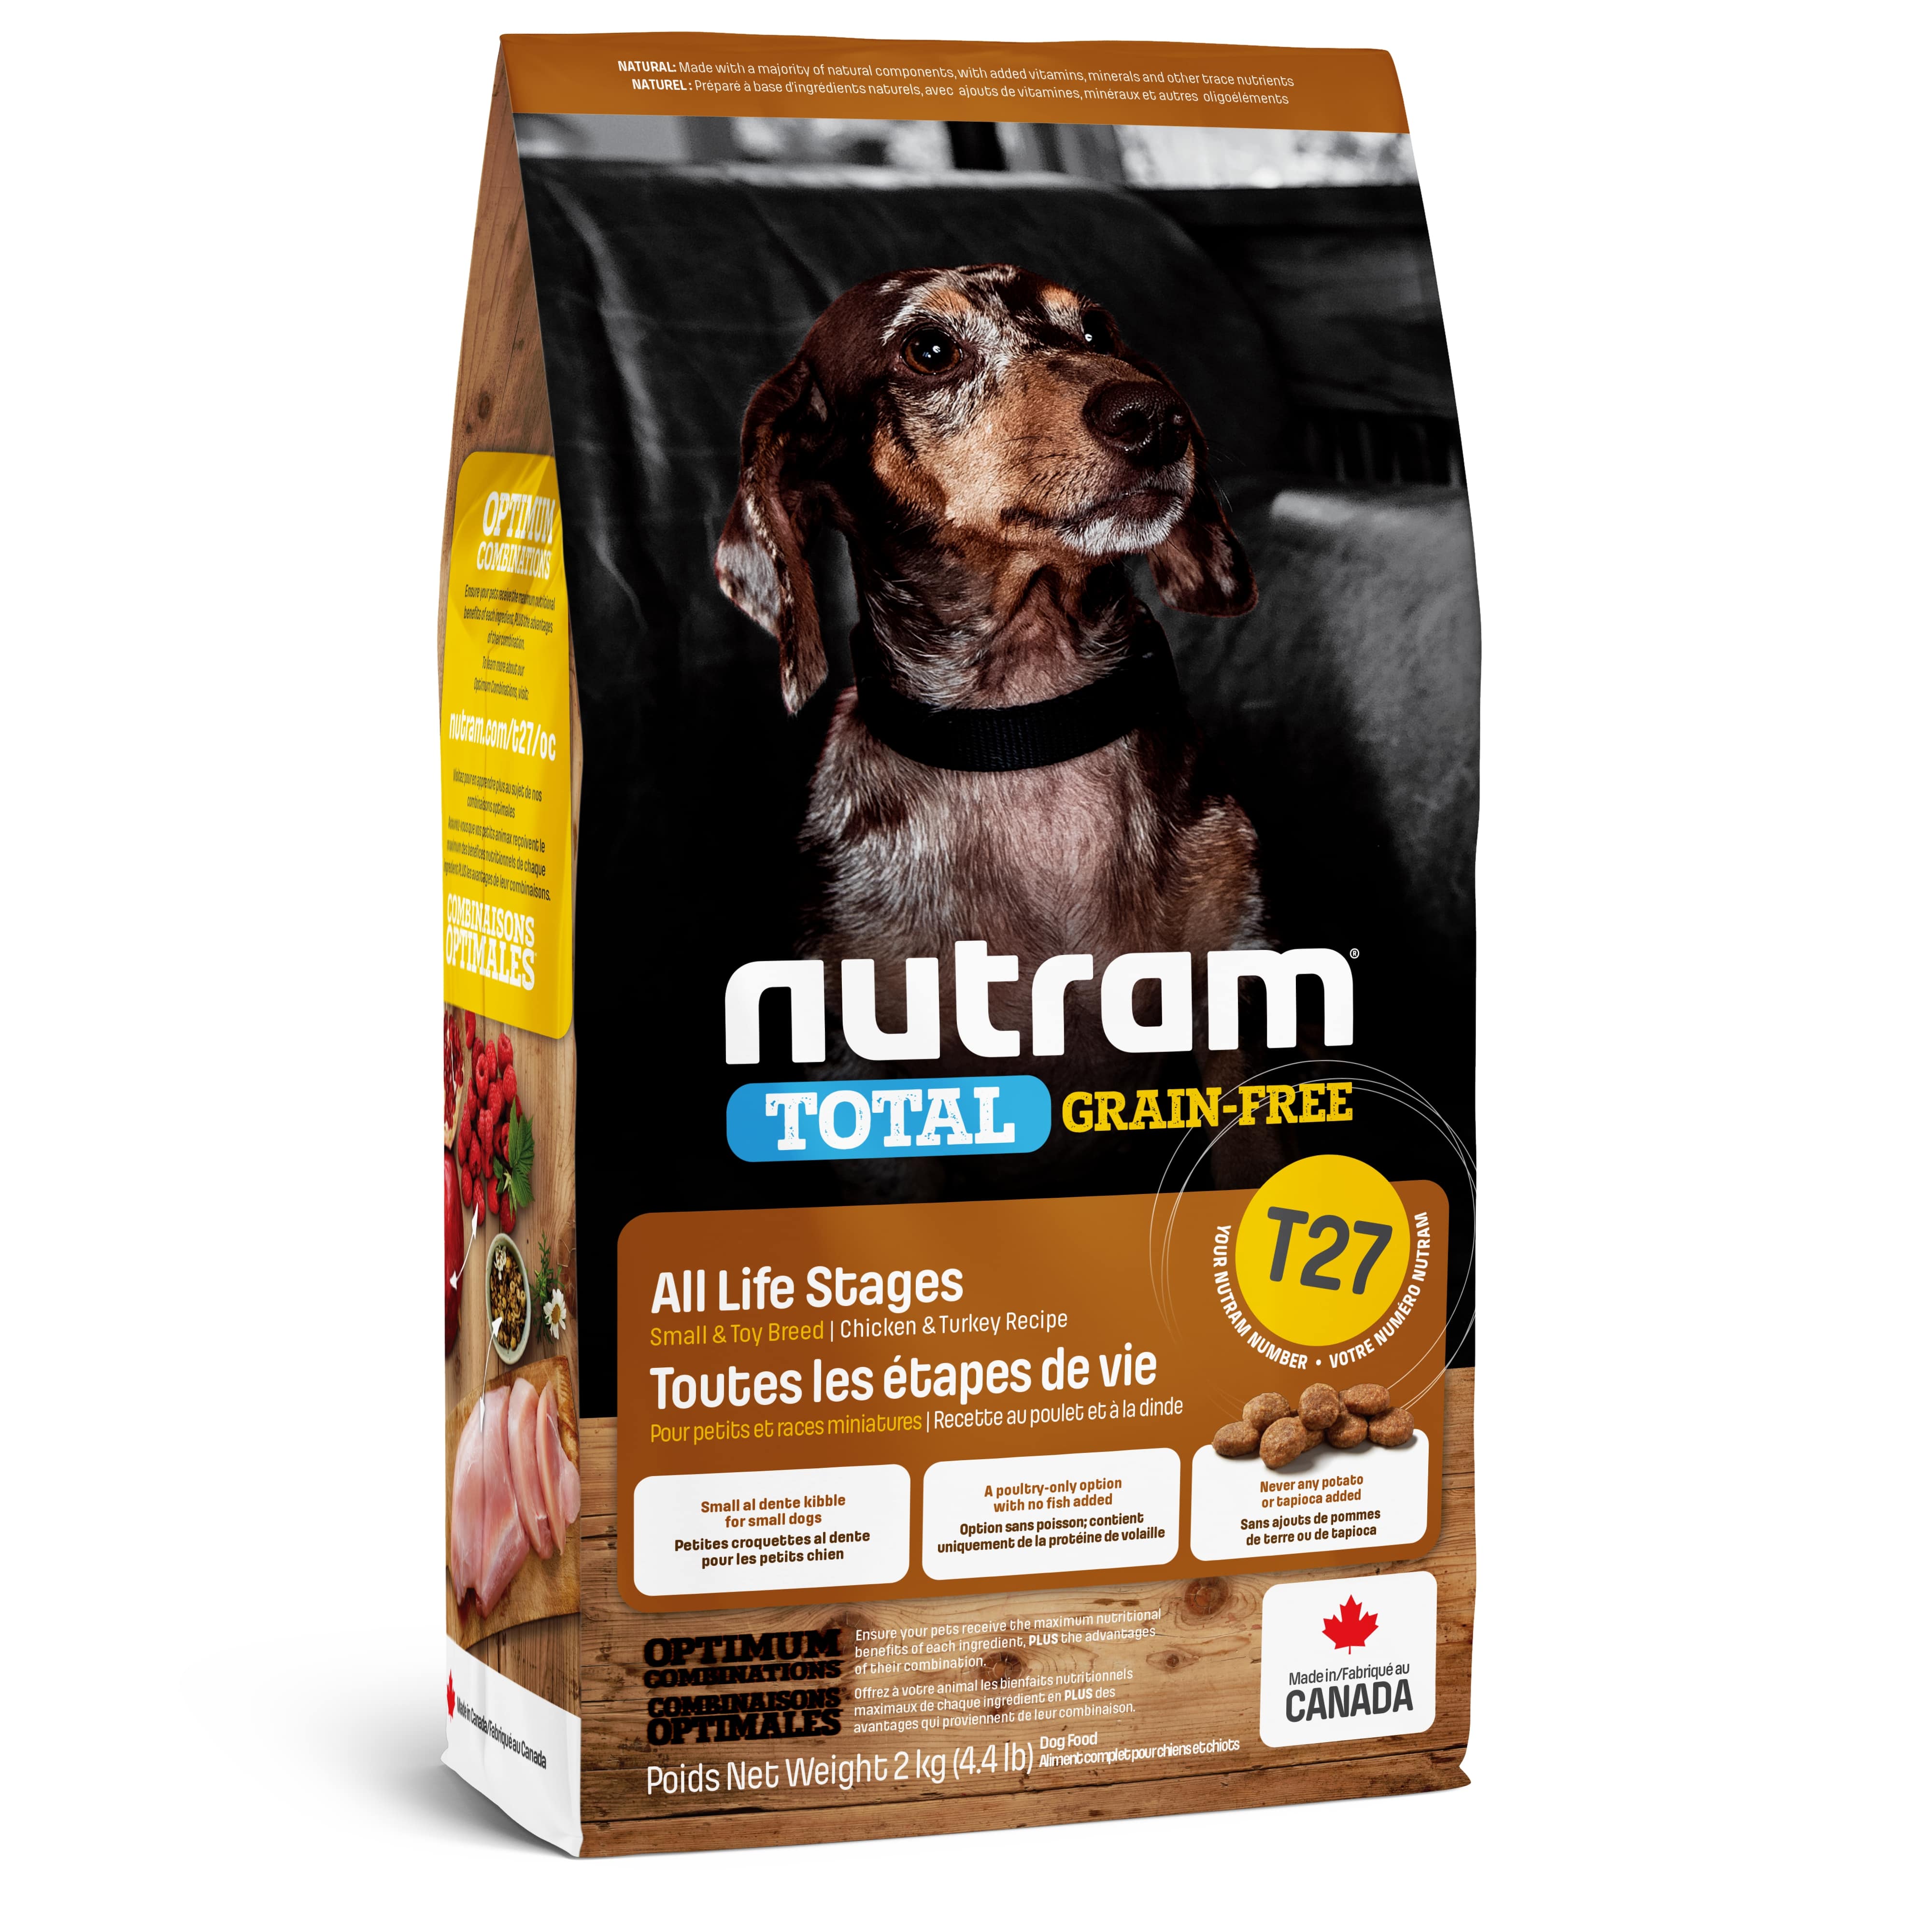 T27 Nutram Total Grain-Free® Chicken and Turkey Recipe Small Breed Dog Food